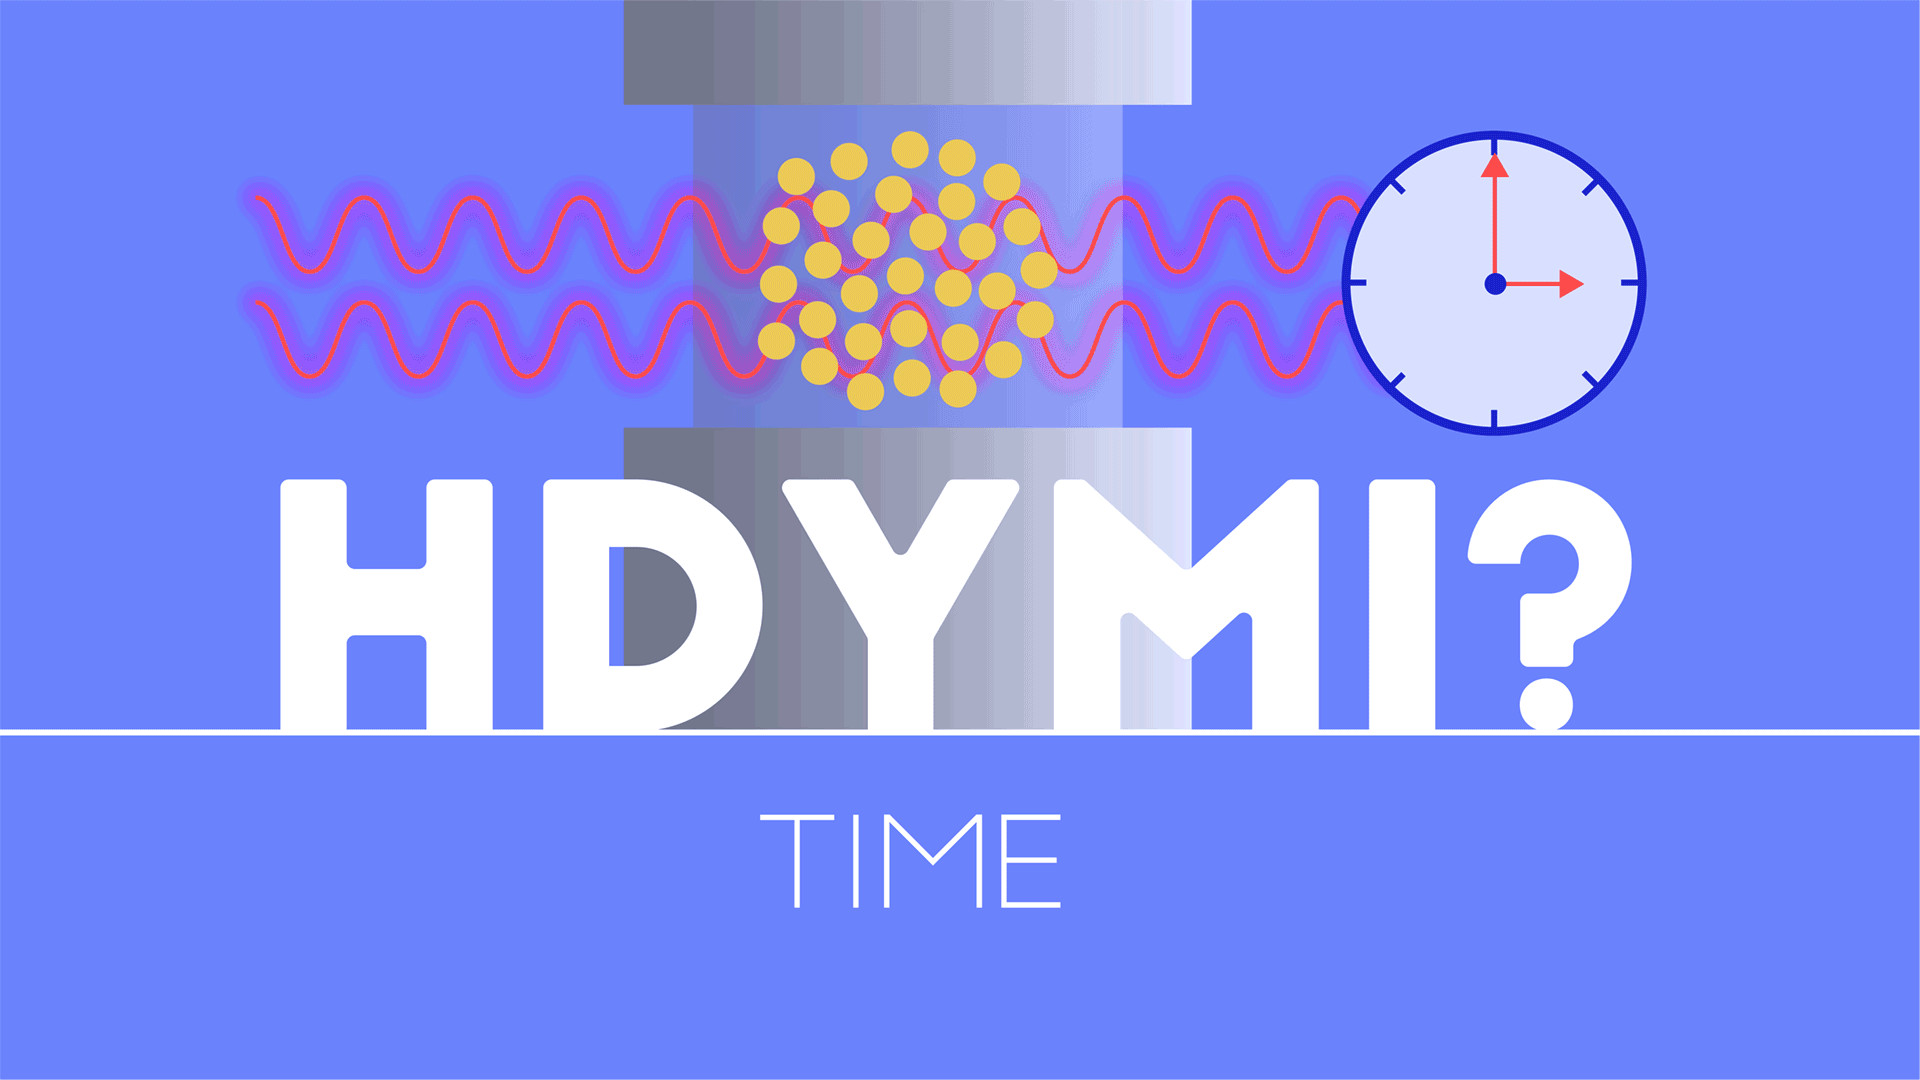 Animated illustration shows a clock, waves moving through dots, and the words "HDYMI? TIME."